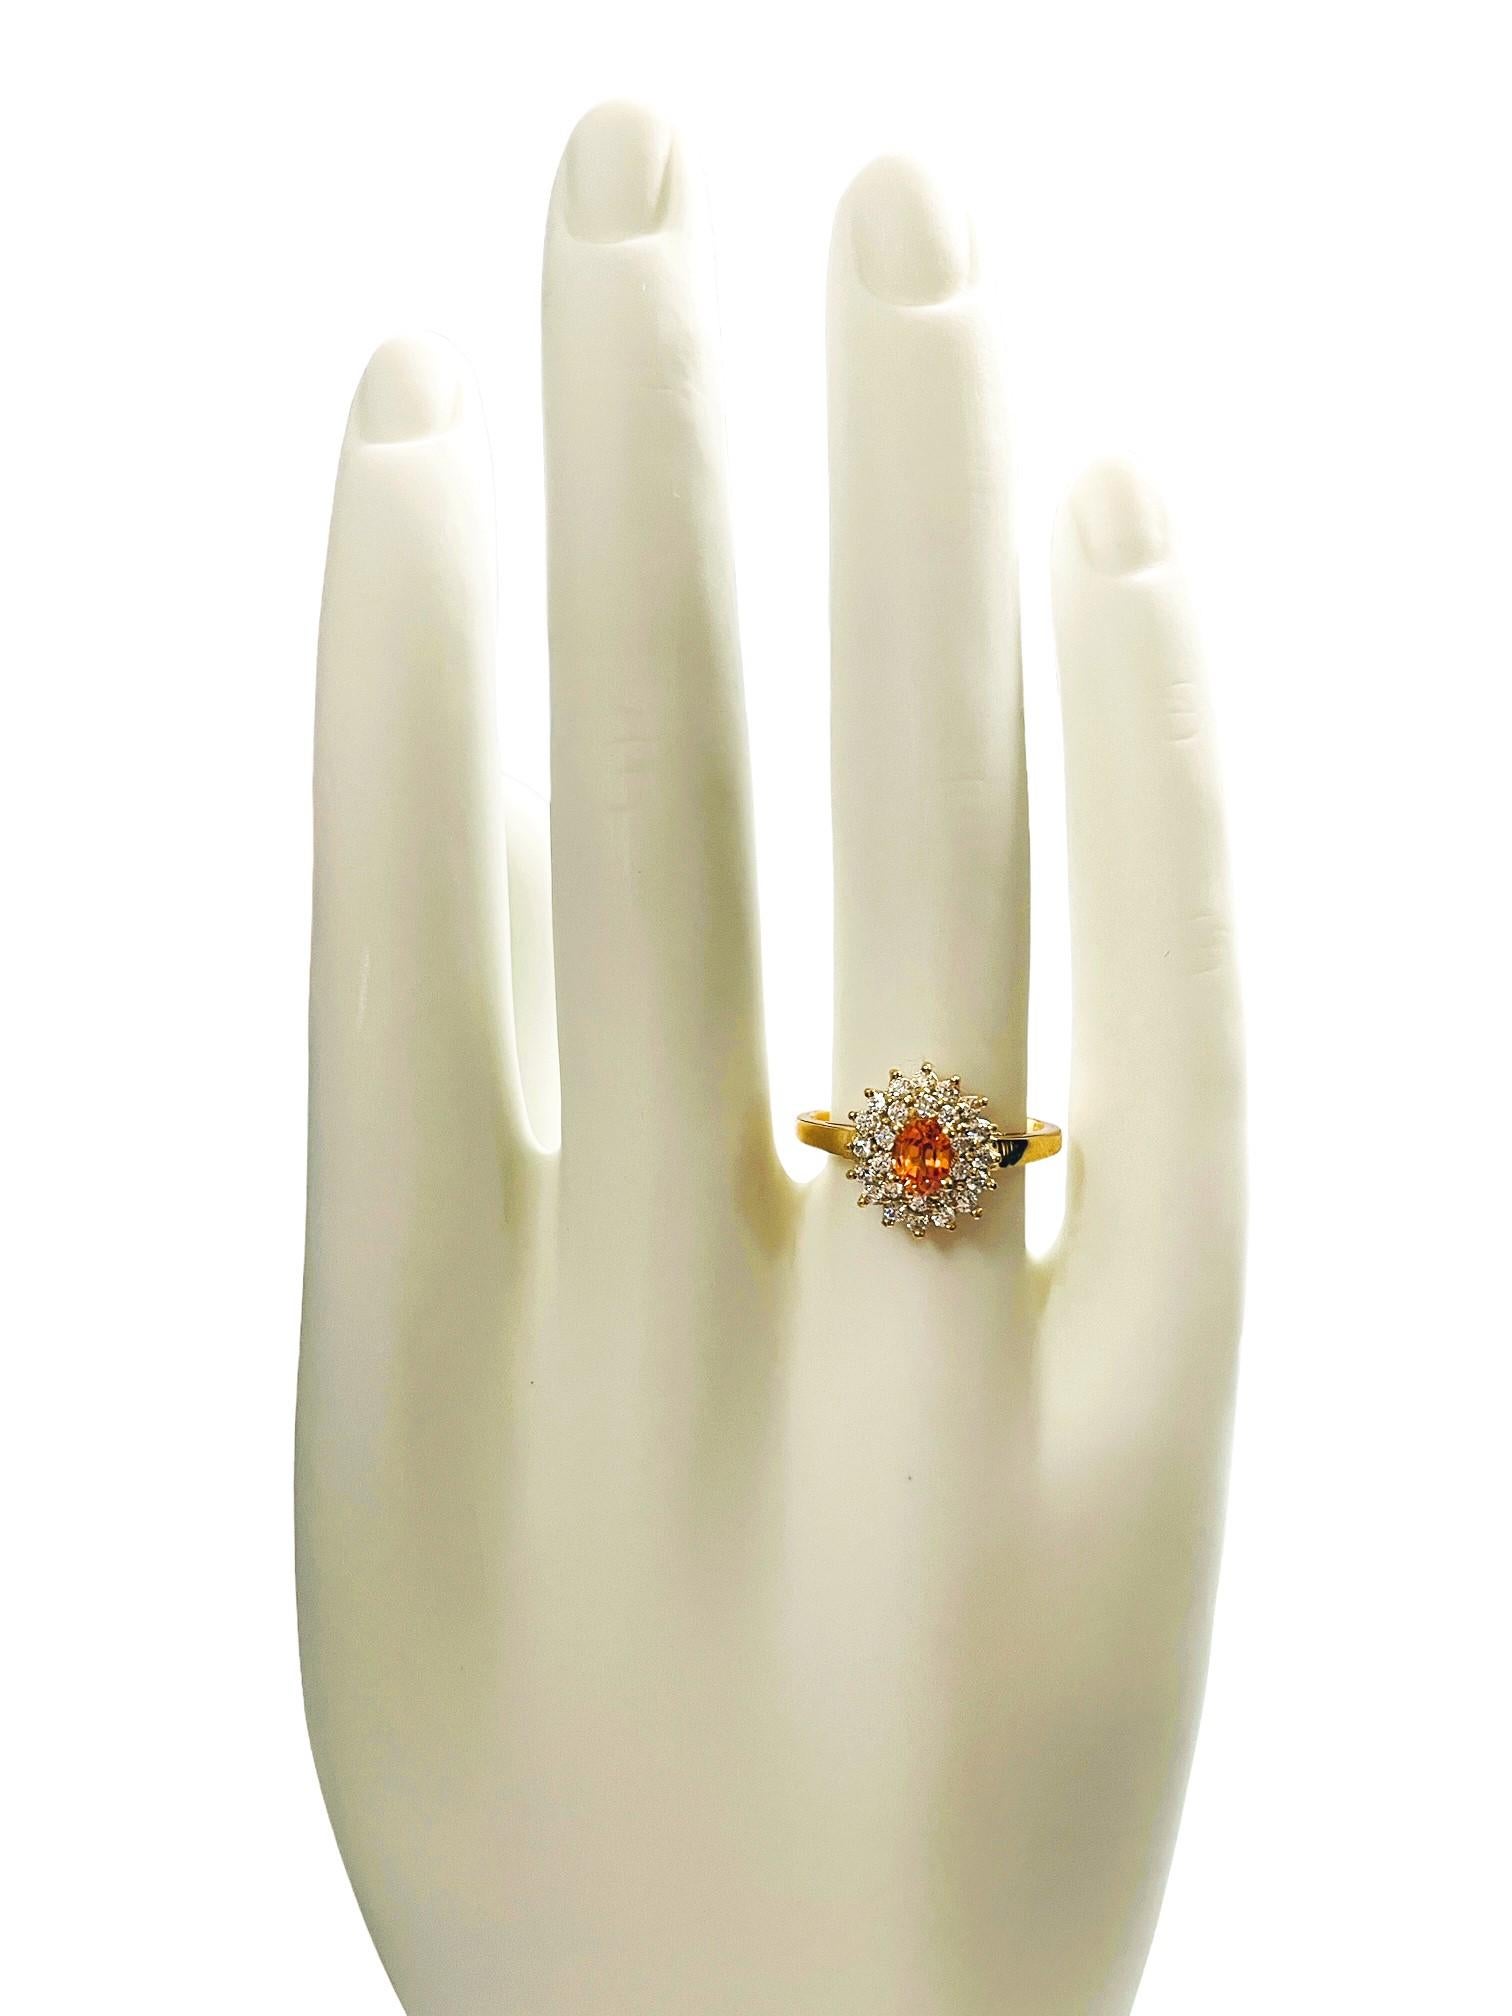 The ring is a size 7.   The stone is from Africa and is just exquisite.The IF stands for 